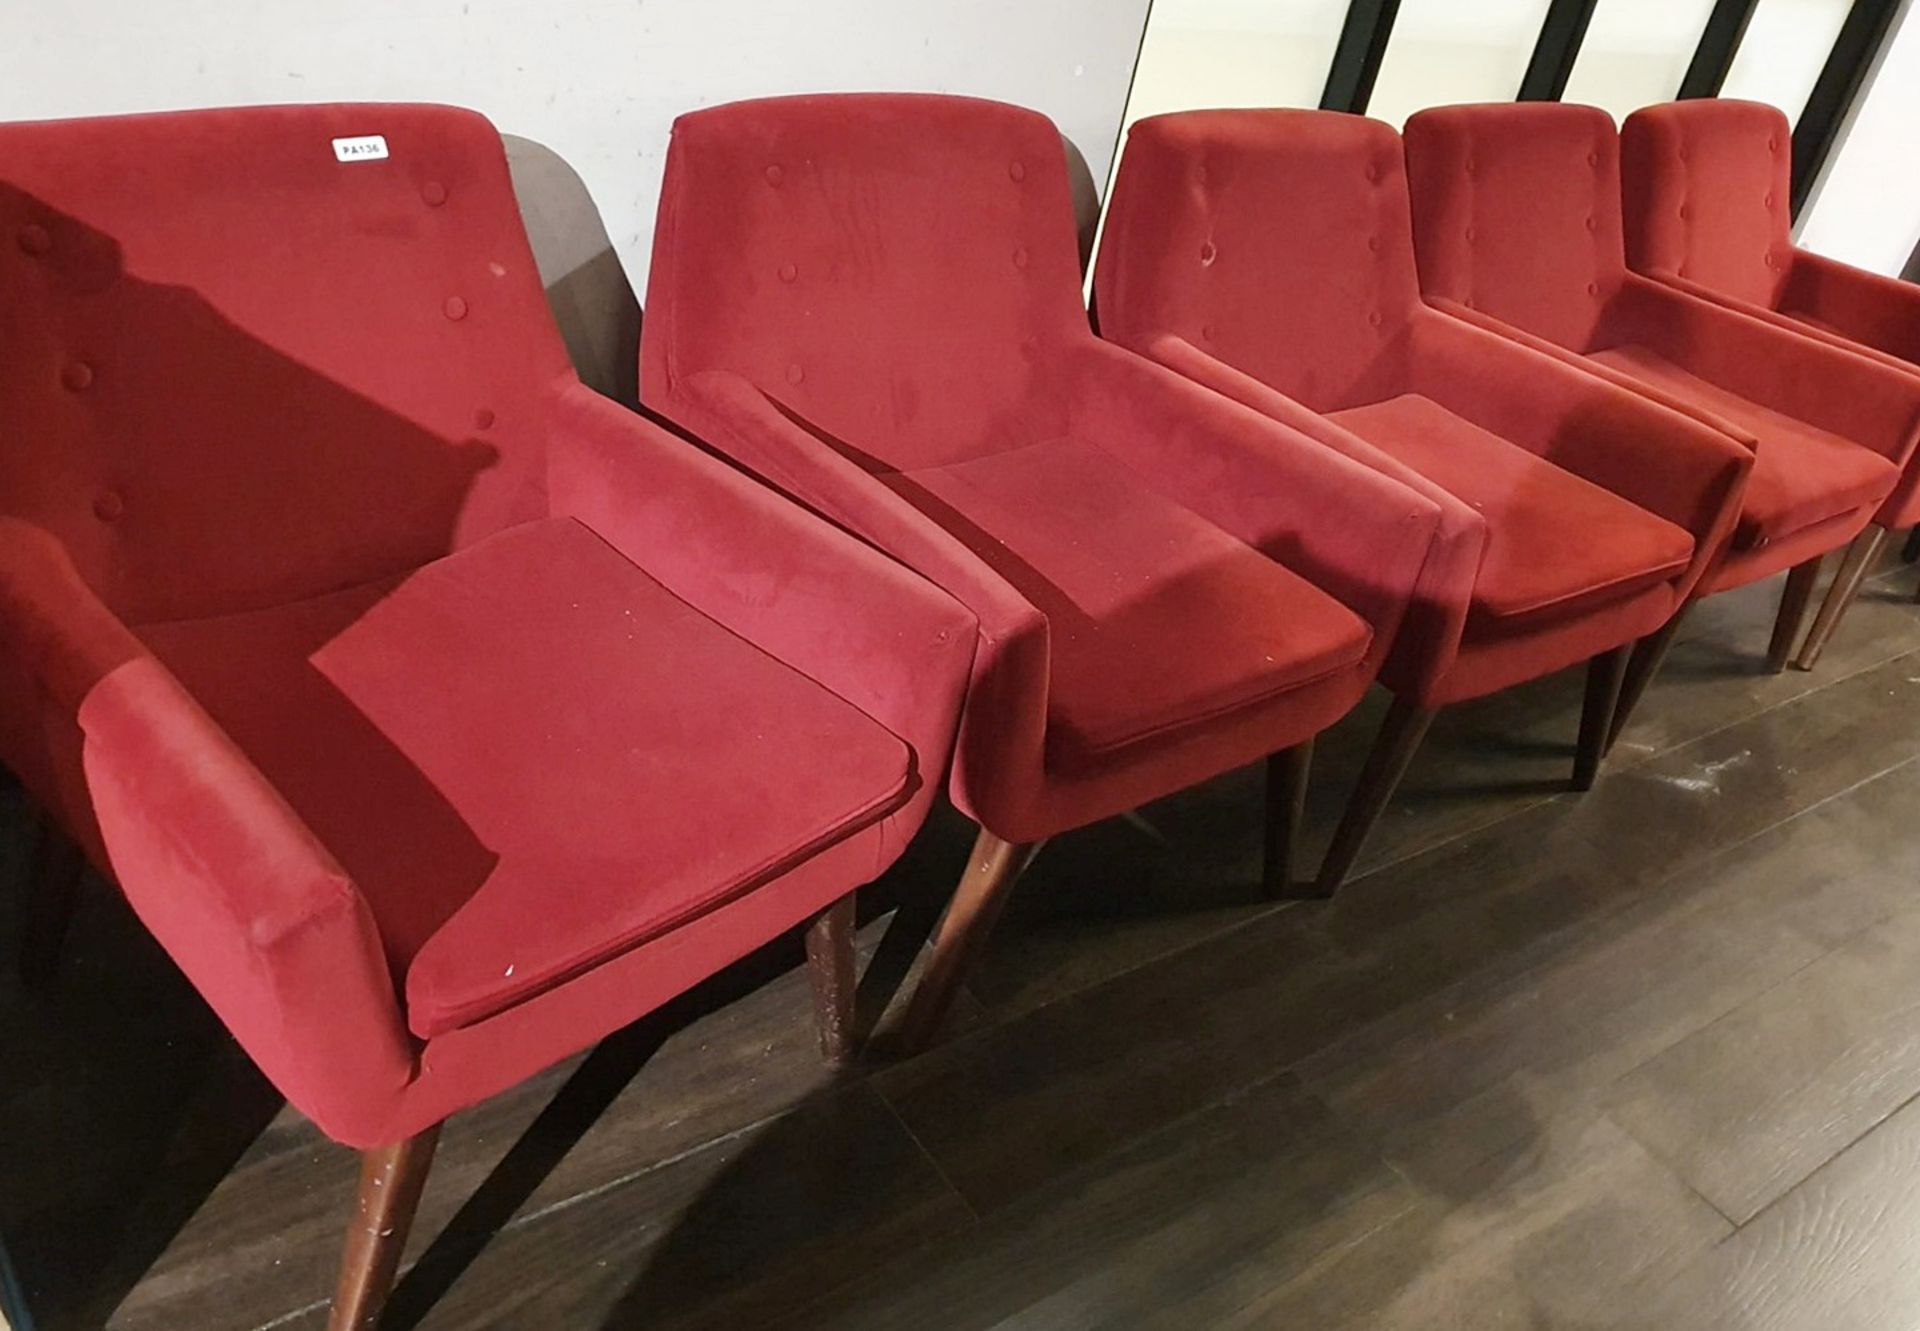 5 x Retro Style Armchairs in Red Fabric - H80/45 x W68 x D70 cms - Ref PA136 - CL463 - Location: